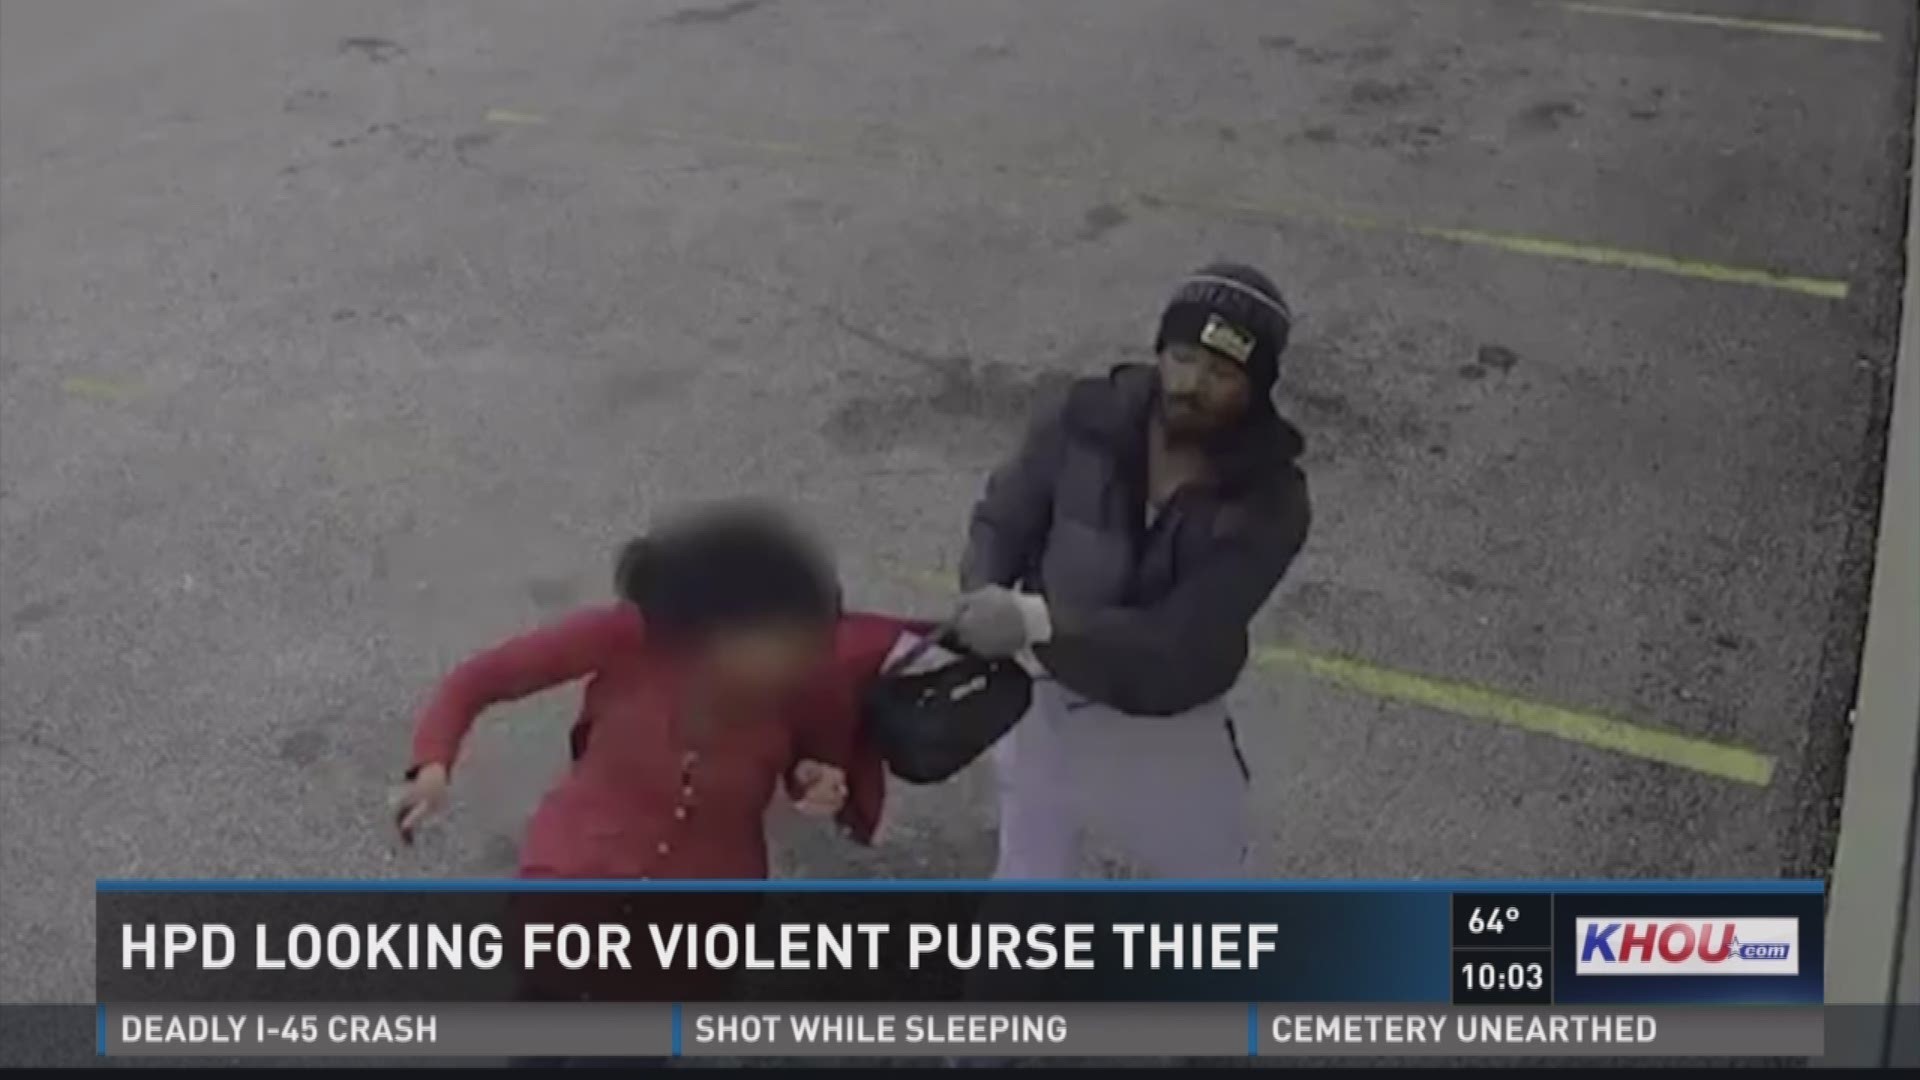 Houston police are seeking the public's help in identifying the suspect caught on video violently snatching purse from a woman in southwest Houston.